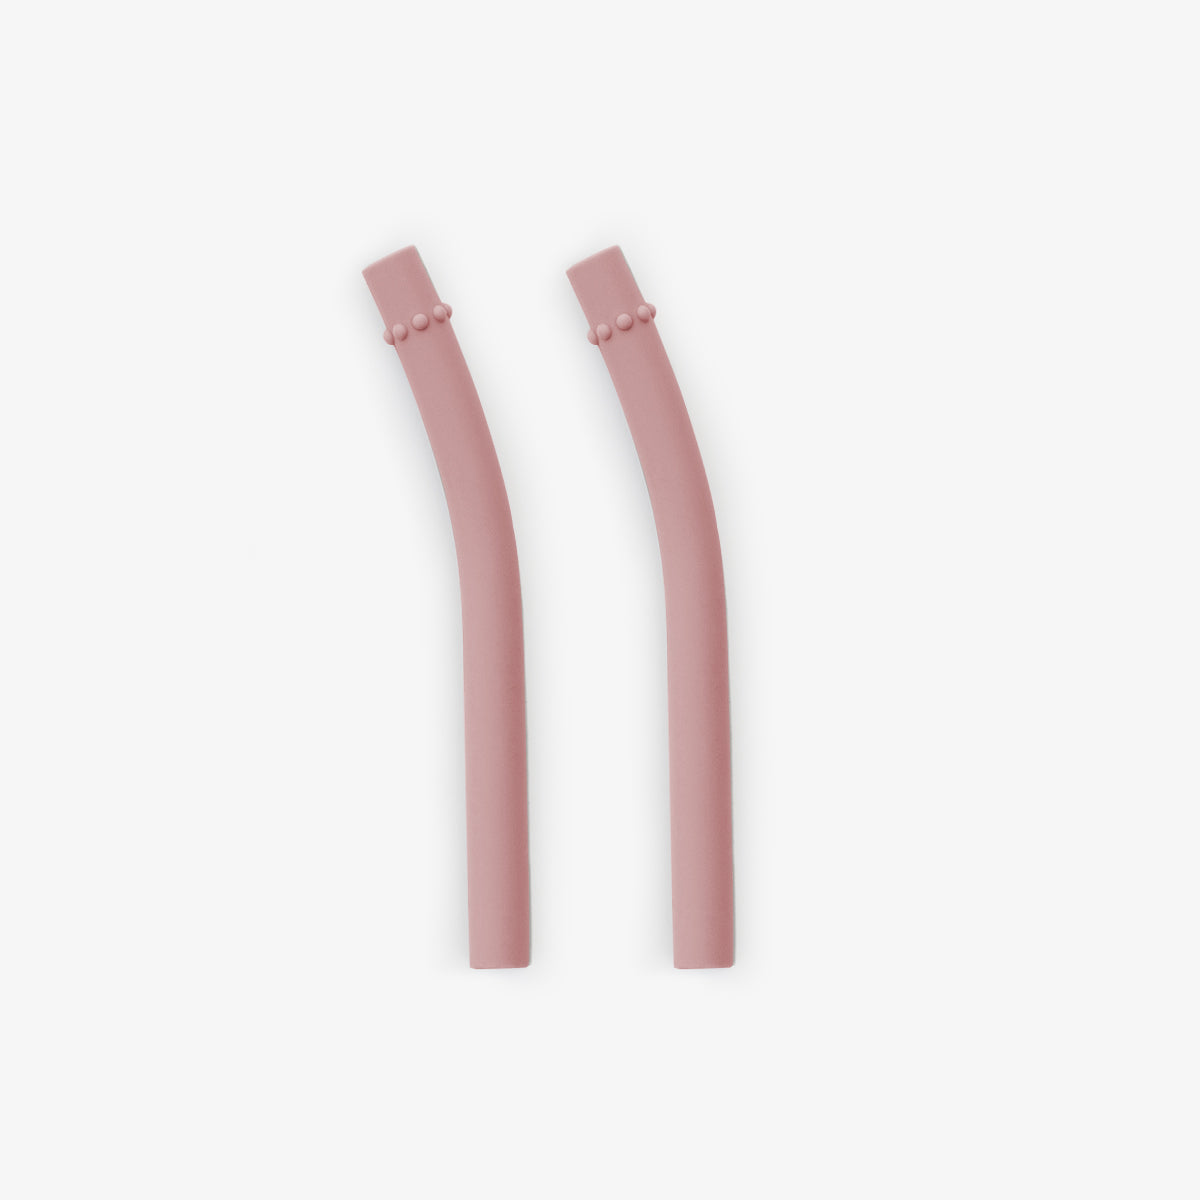 Mini Straws in Blush / Silicone Straw Replacement Pack for the ezpz Mini Cup & Straw System